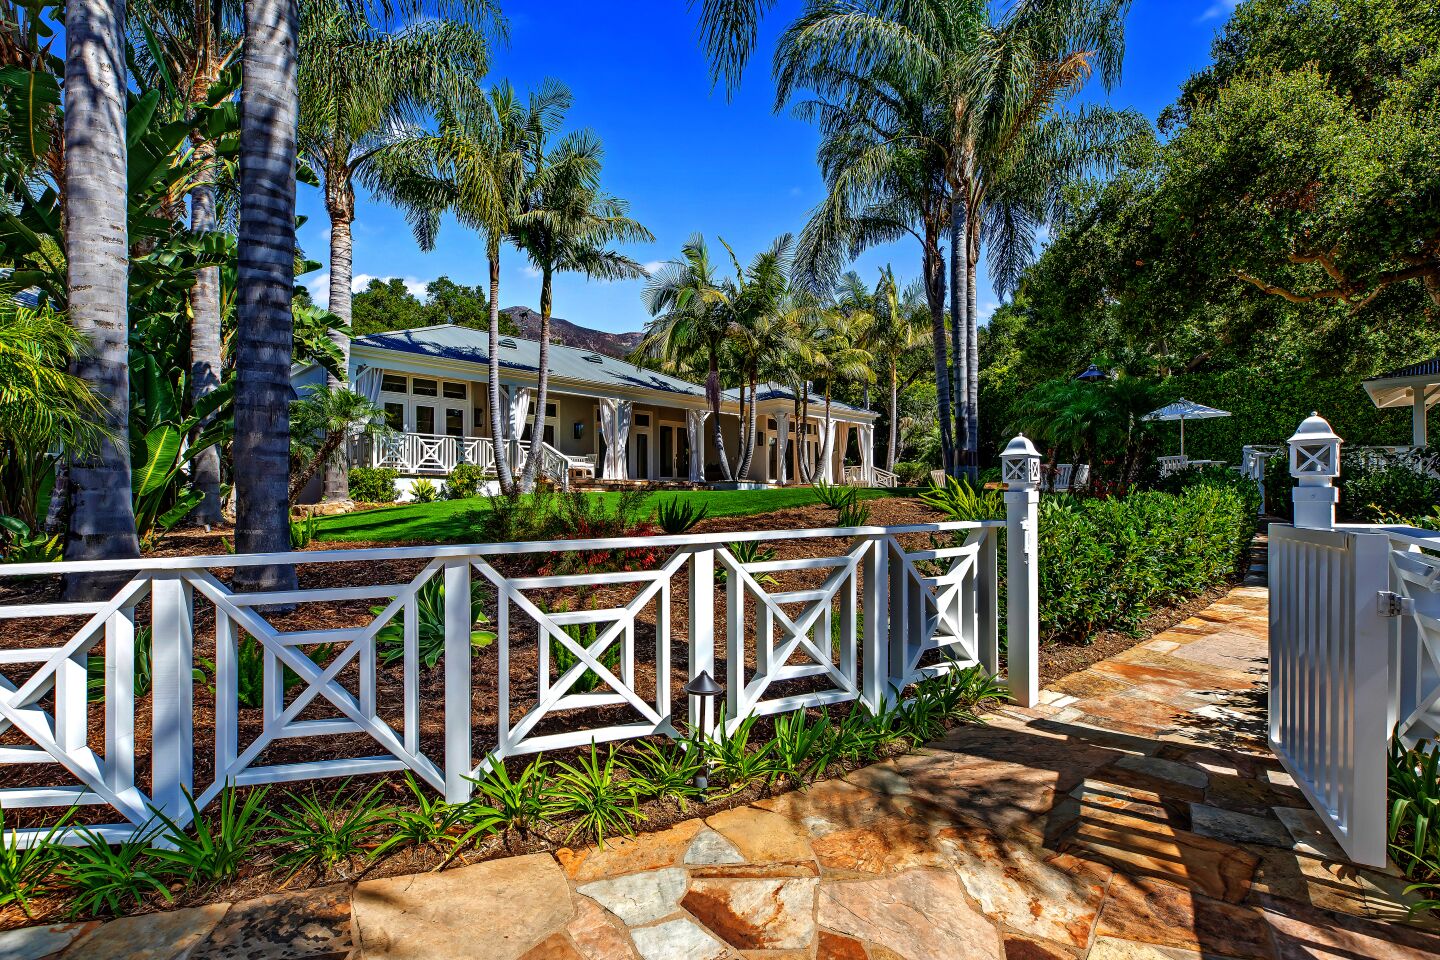 The estate, which features a Bermuda-style main house and guest house, sits on a one-acre lot dotted with palm trees and tropical plants native to Hawaii.